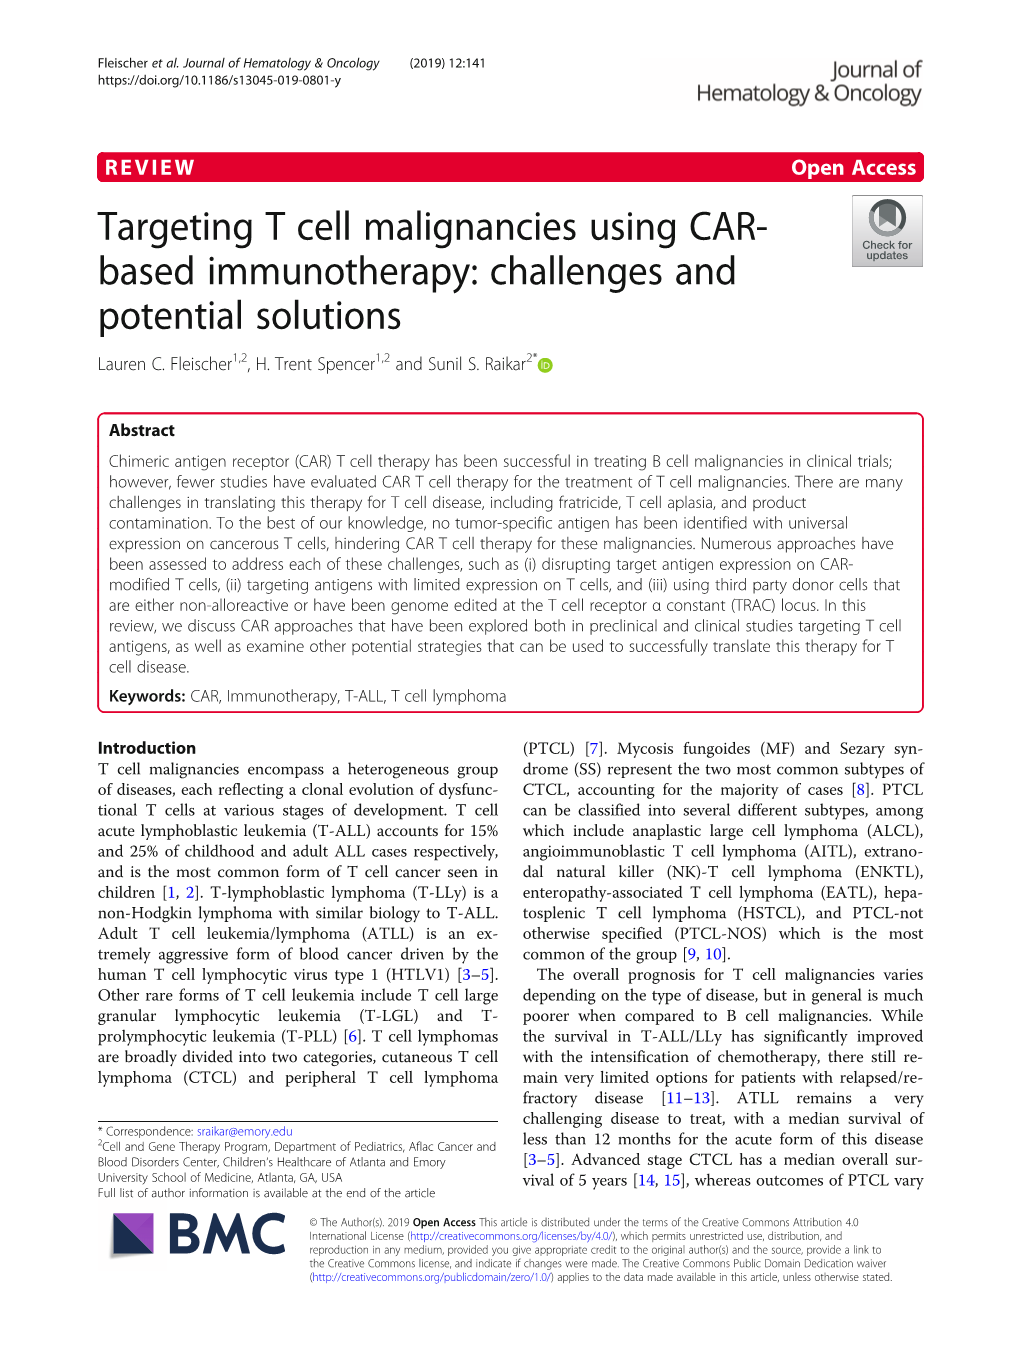 Targeting T Cell Malignancies Using CAR-Based Immunotherapy